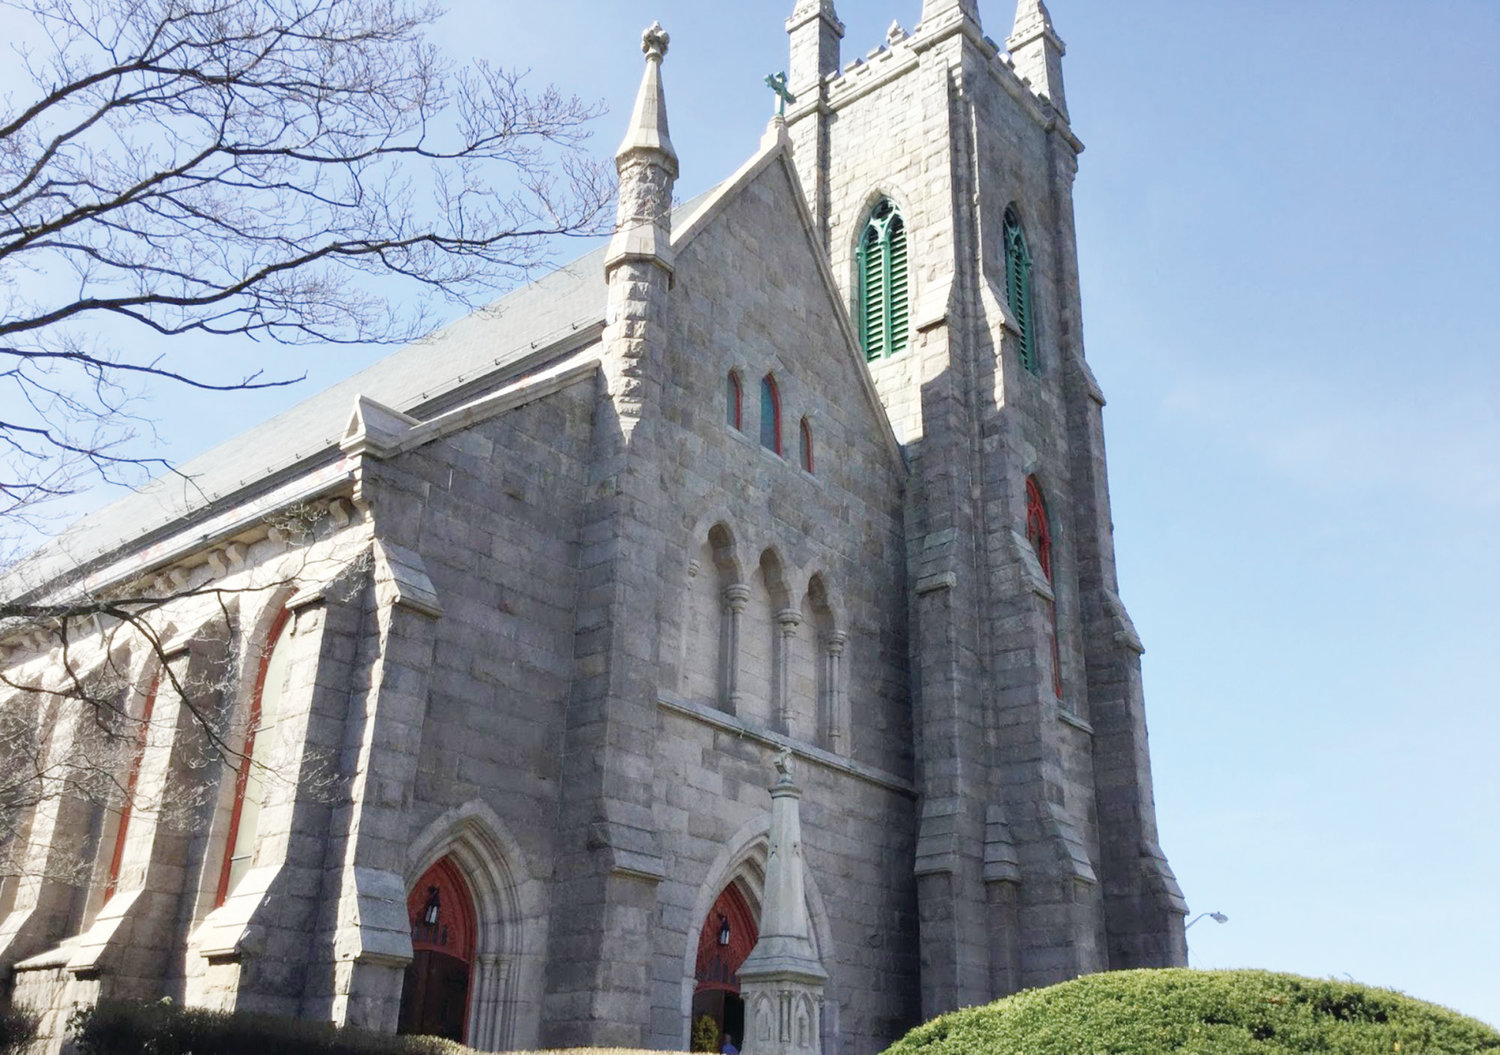 St. Mary’s Church on Broadway, administered by the Priestly Fraternity of St. Peter, will celebrate its 150th anniversary in Providence, with Mass on July 11 at 6:30 p.m.